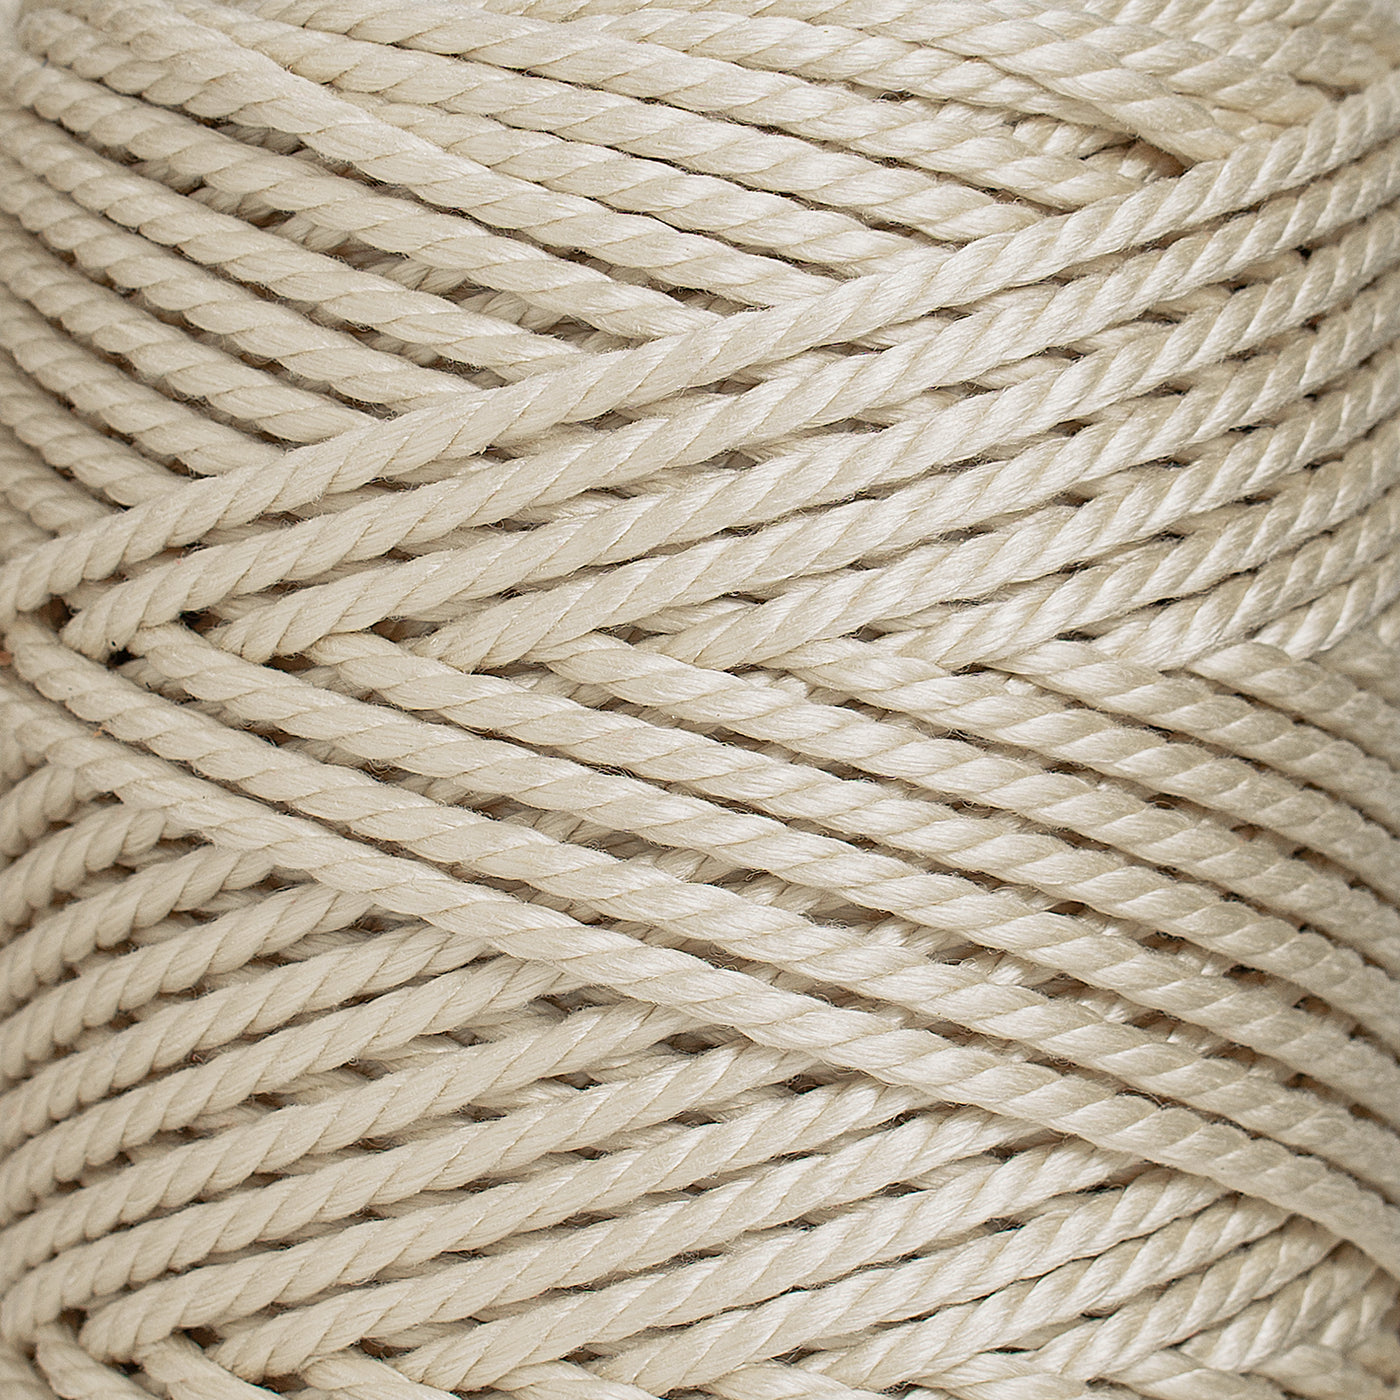 OUTDOOR RECYCLED CORD 3 MM - 3 PLY - NATURAL COLOR